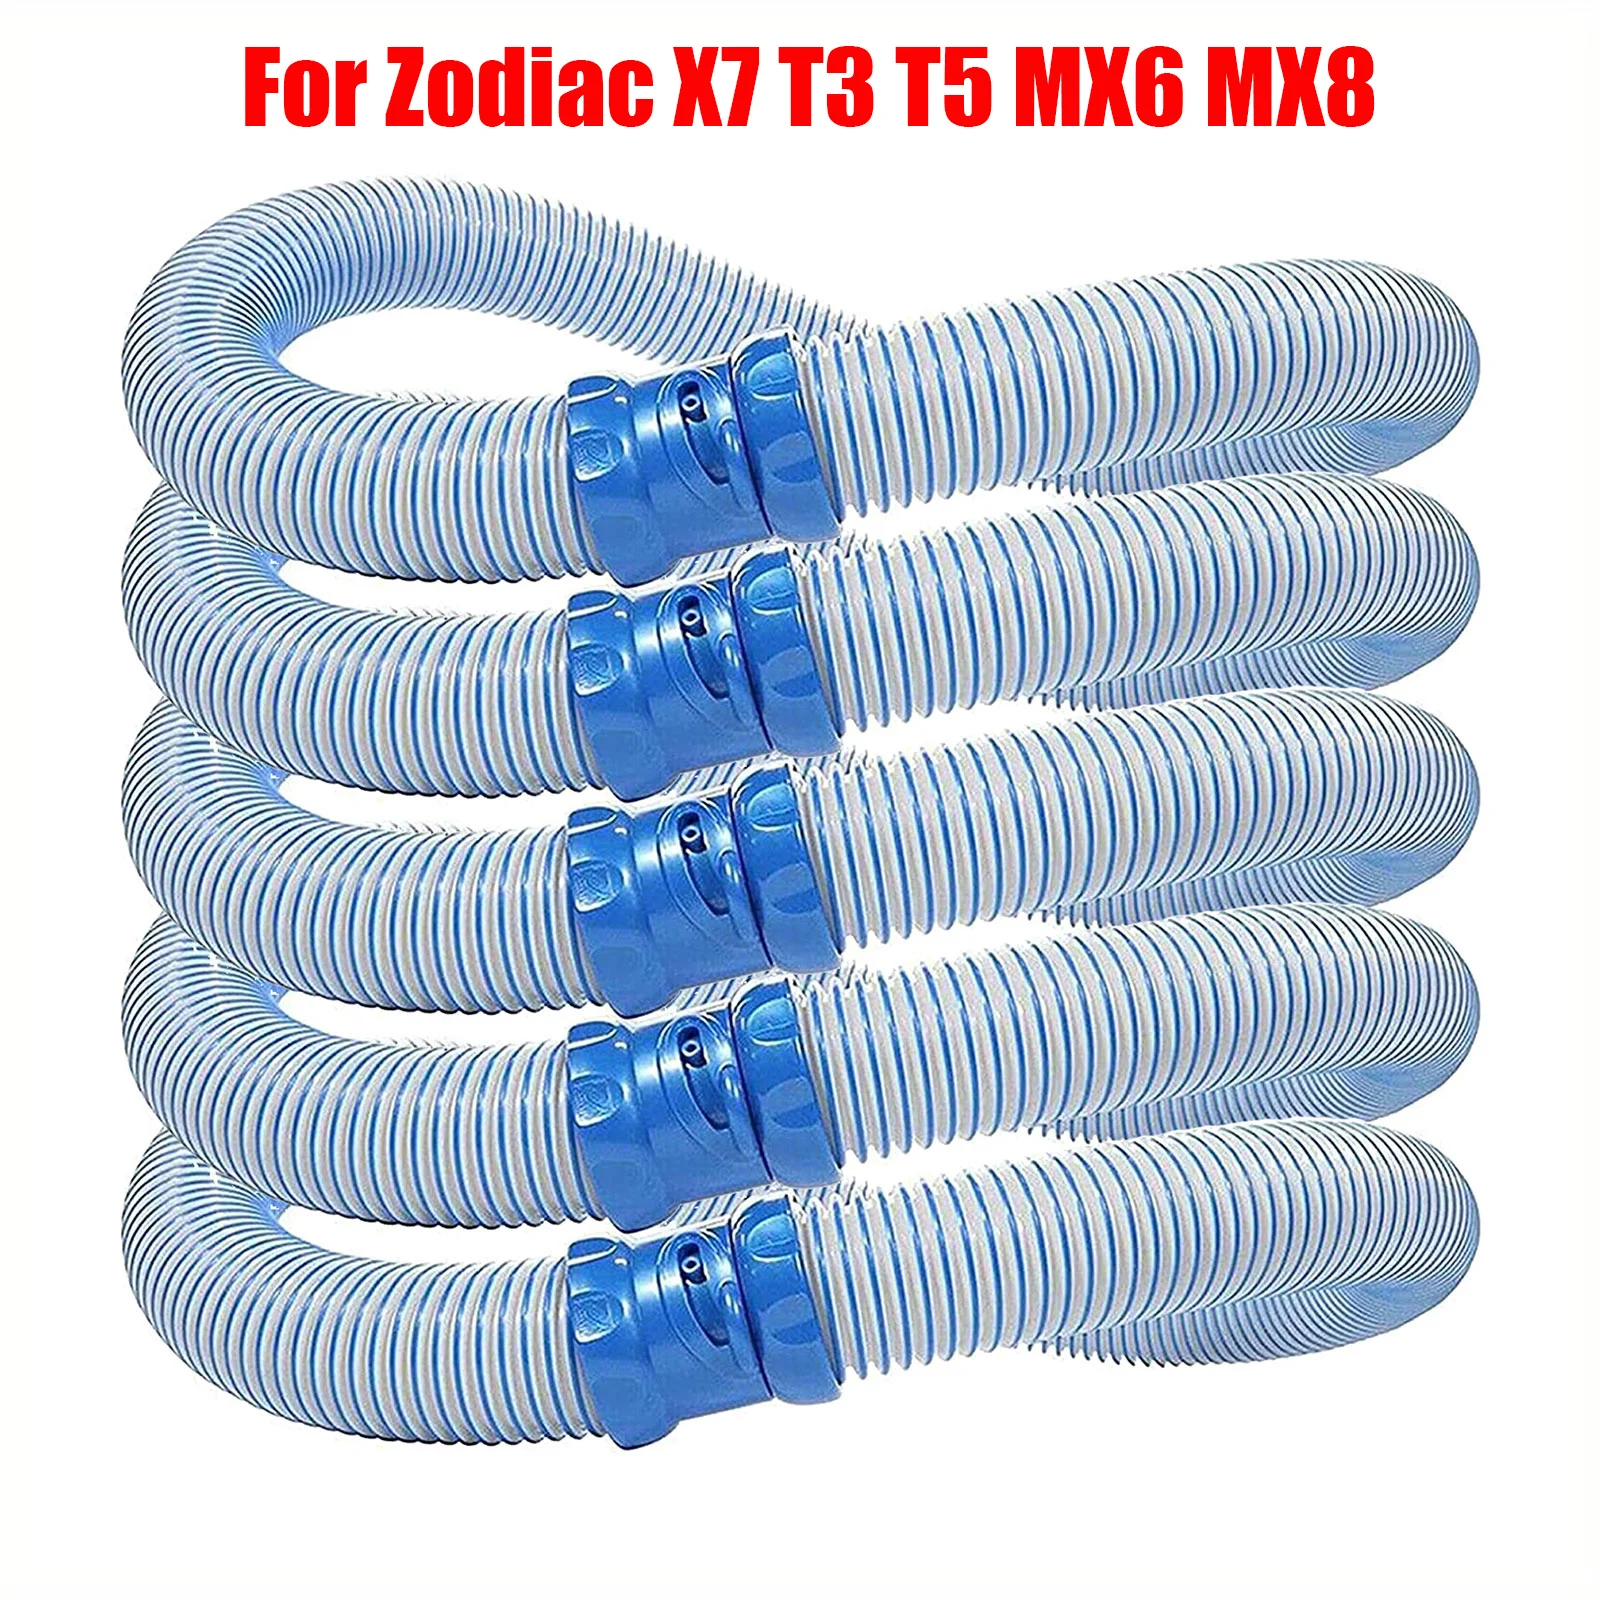 1/3/4pcs Inground Pool Cleaner Suction Pipe Replacement Rubber Pool Vacuum Cleaning Pipe Accessories for Zodiac X7 T3 T5 MX6 MX8